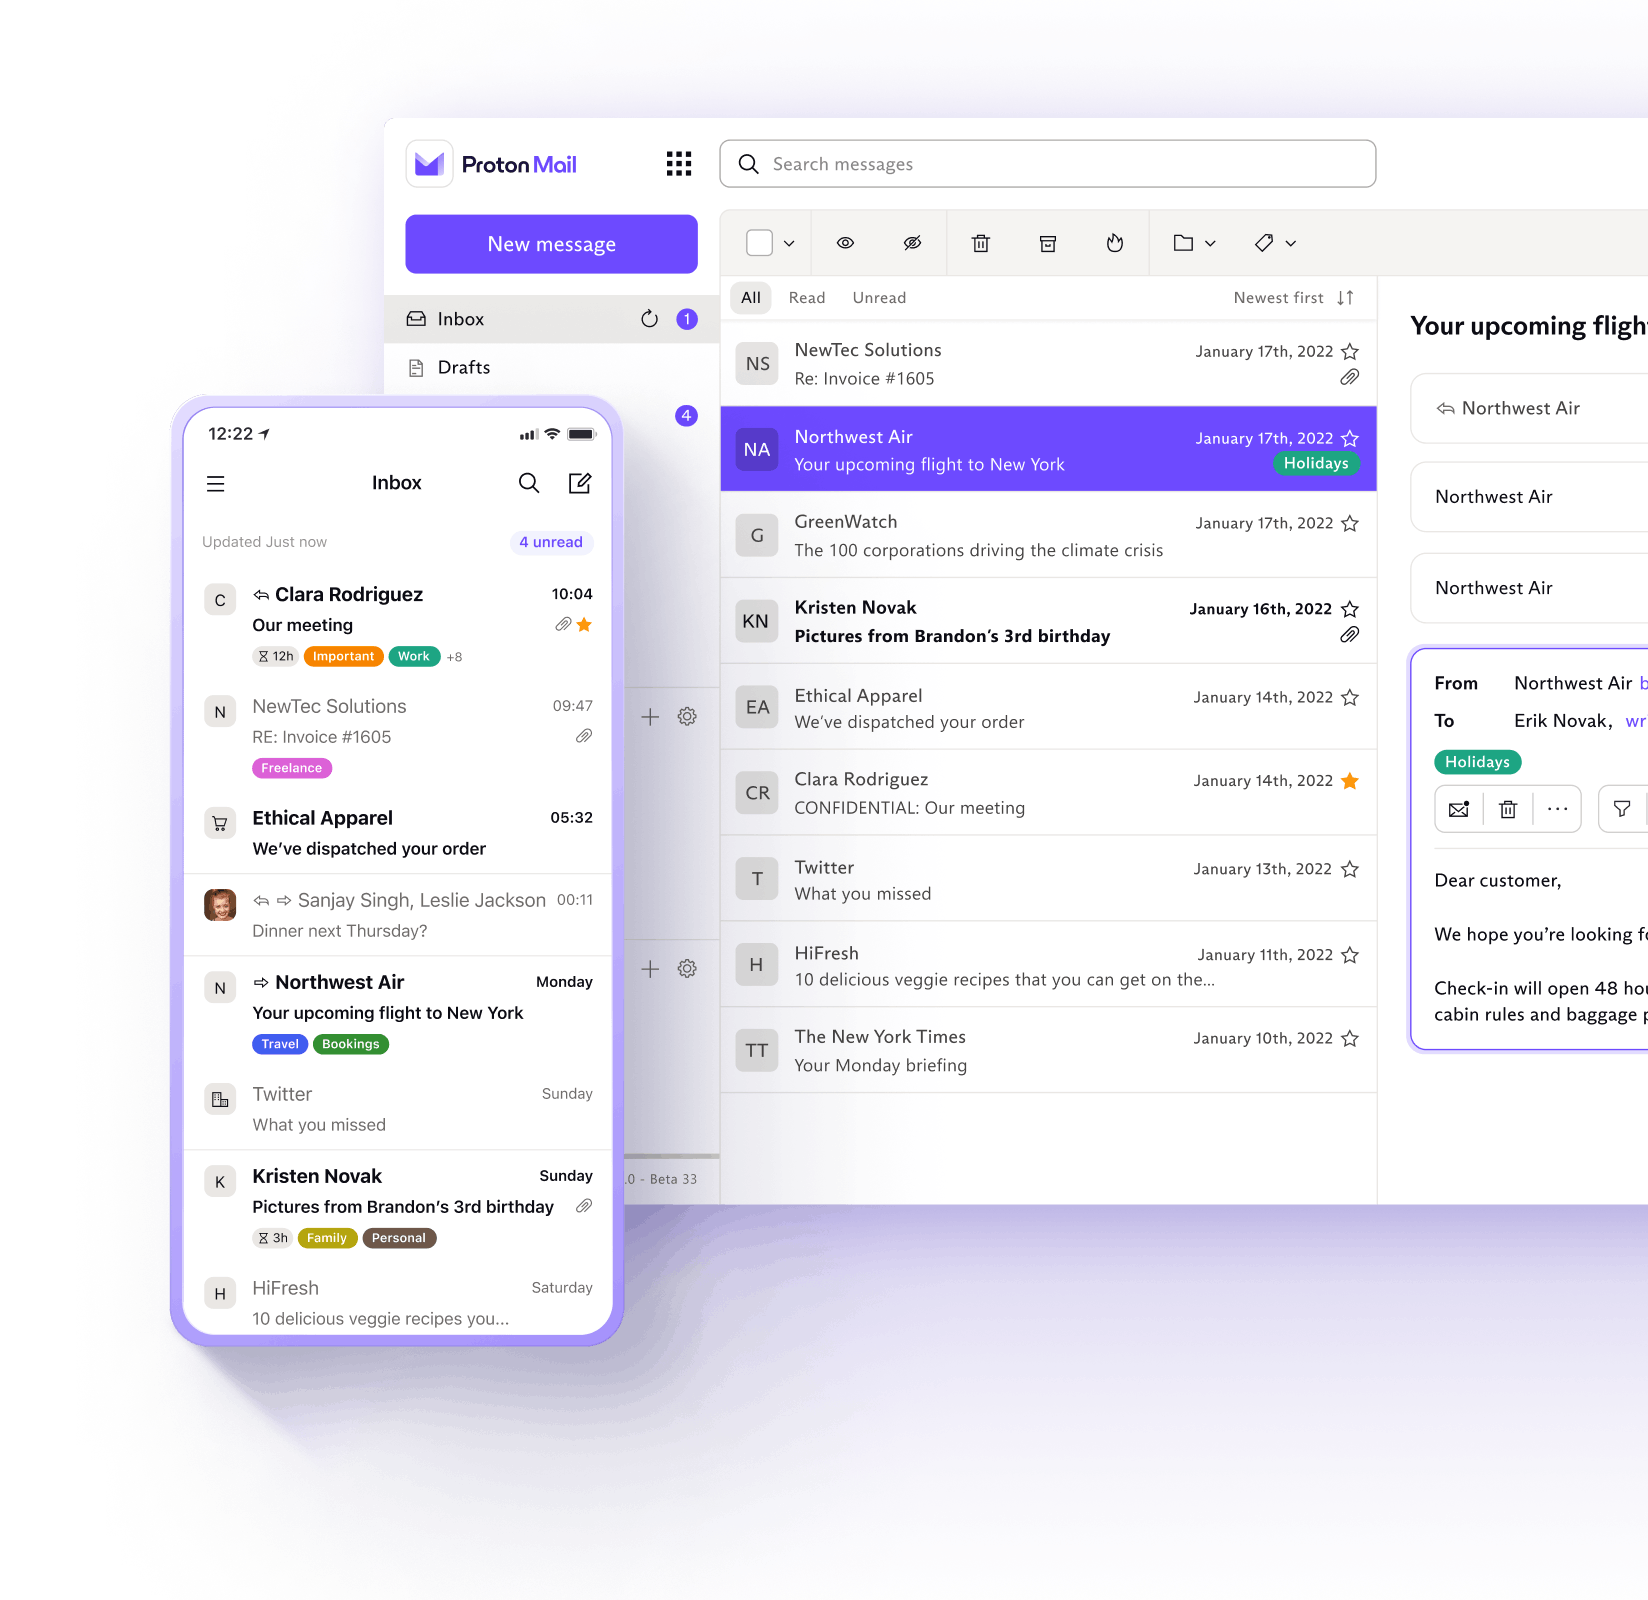 The Proton Mail desktop and mobile interface.